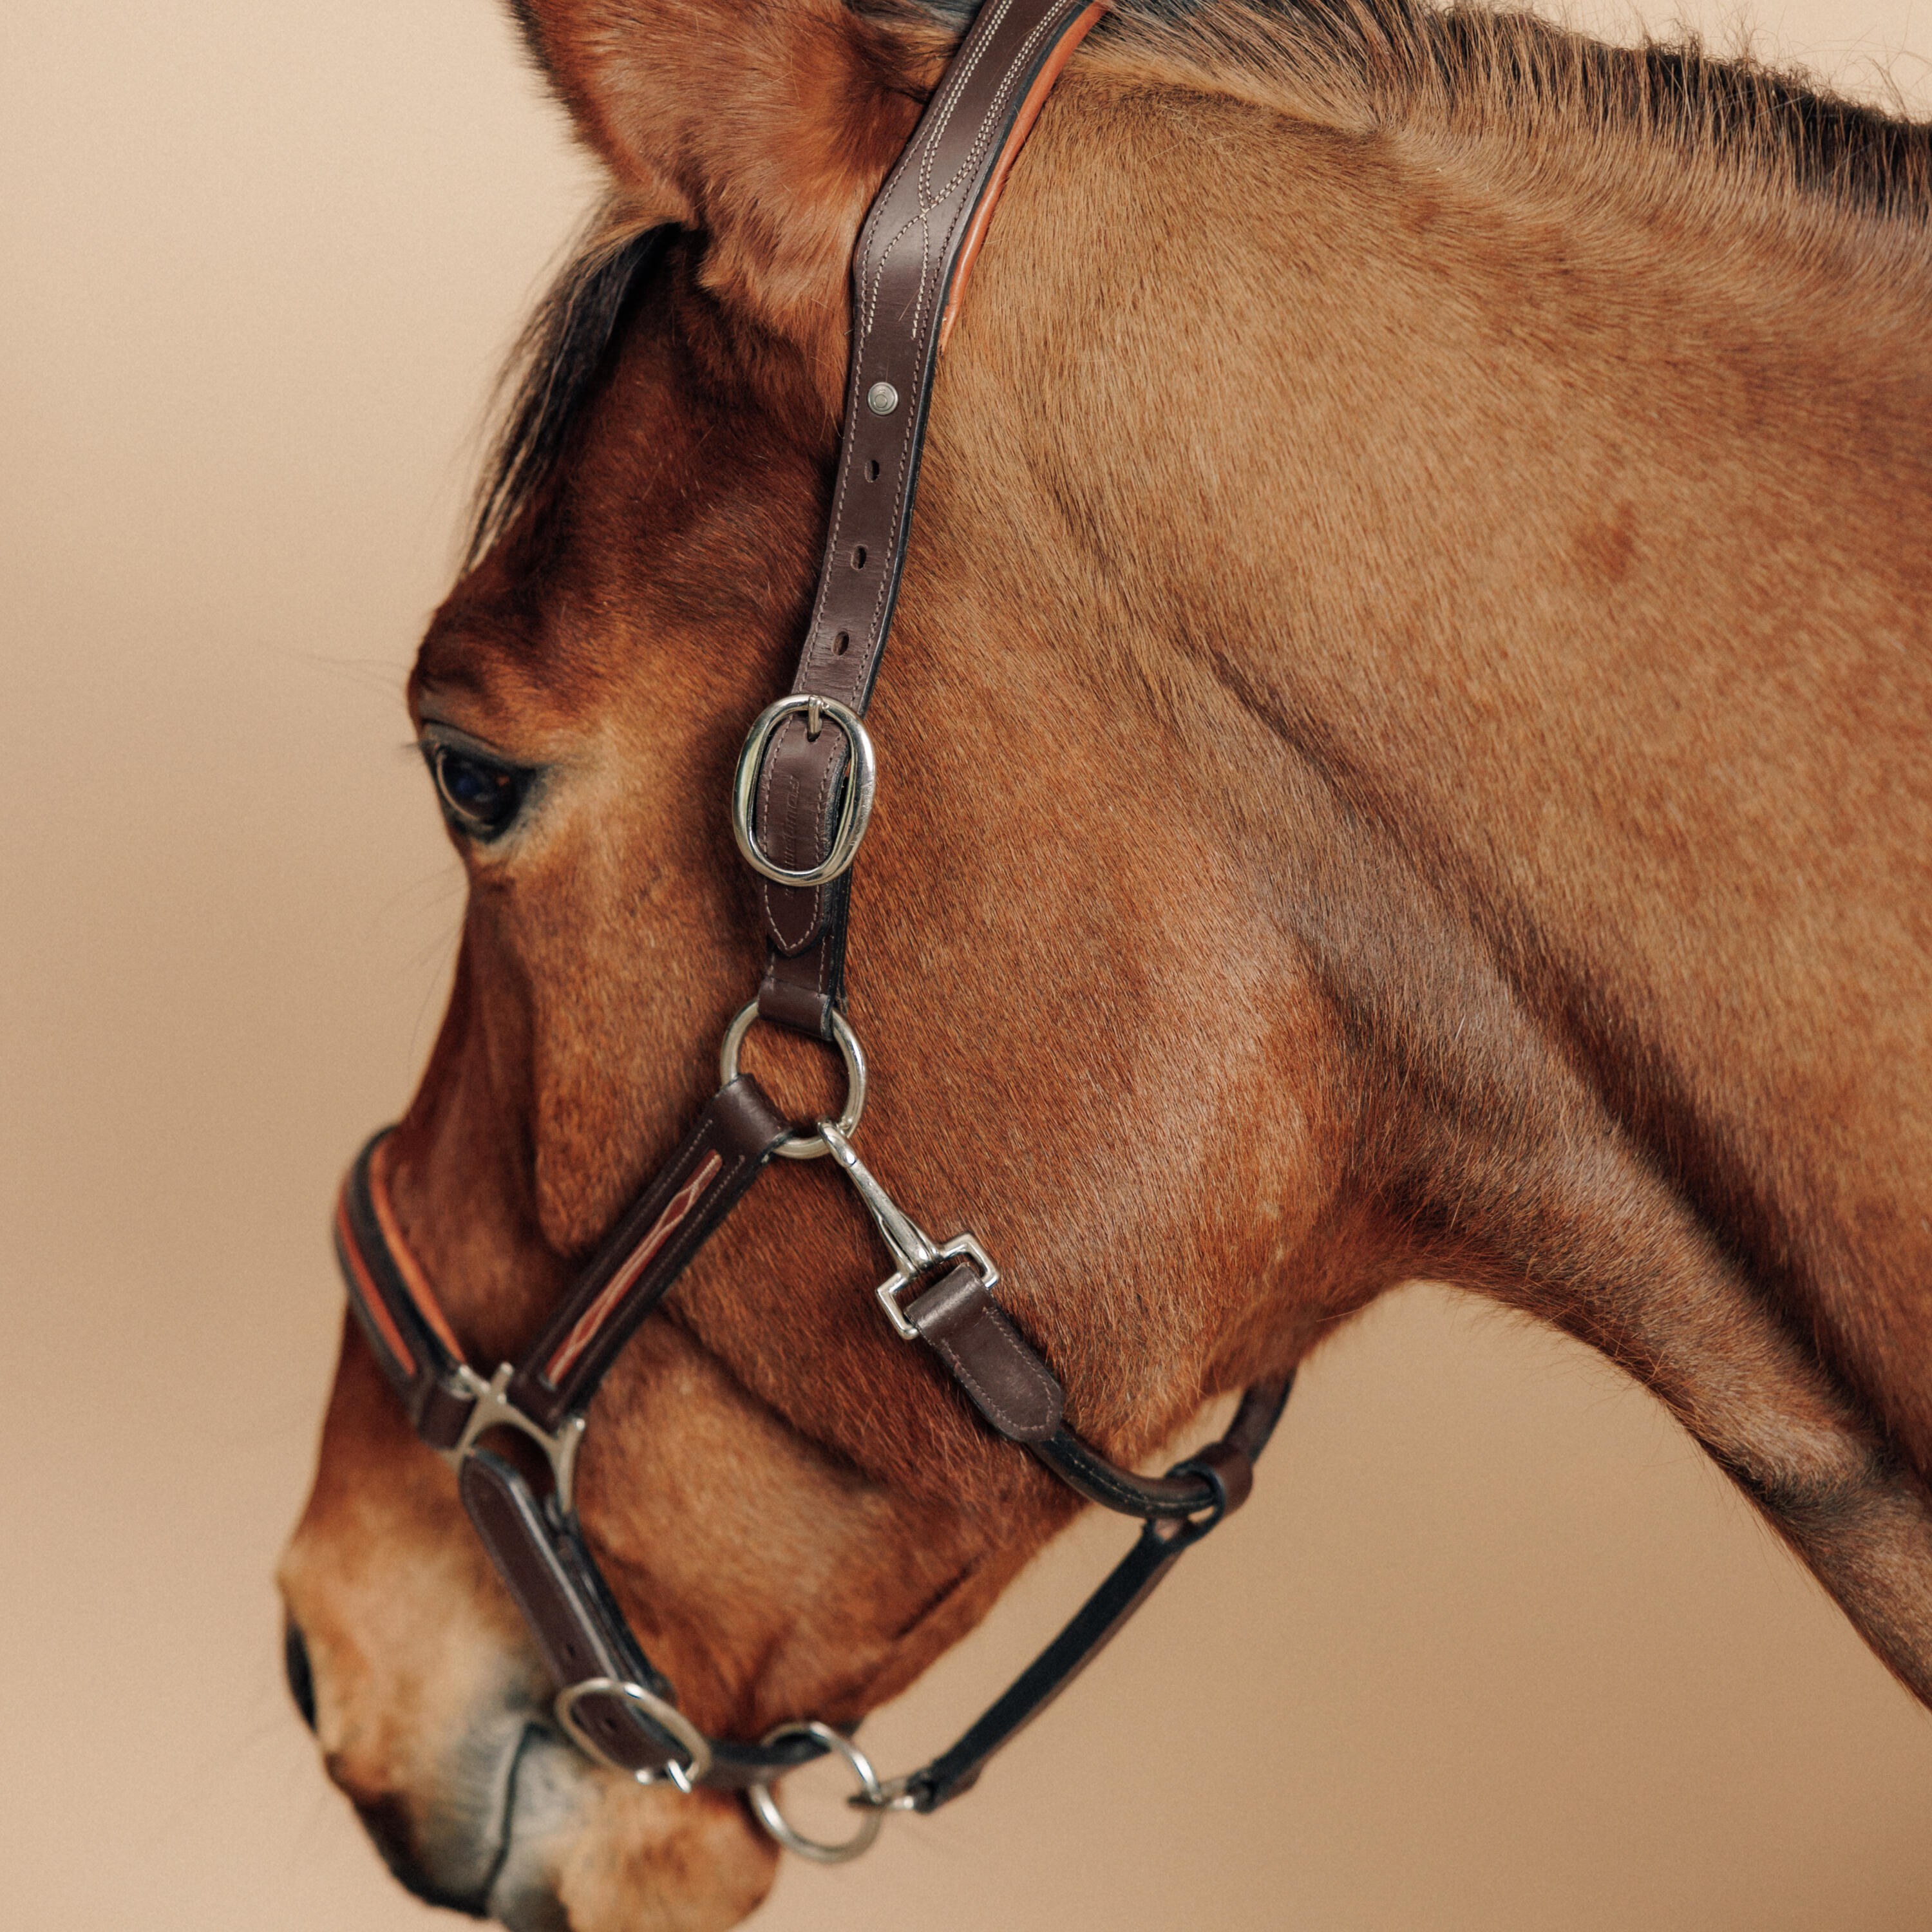 Refurbished Horse Riding Leather Halter for Horse & Pony 900 - Brown - A Grade 5/6